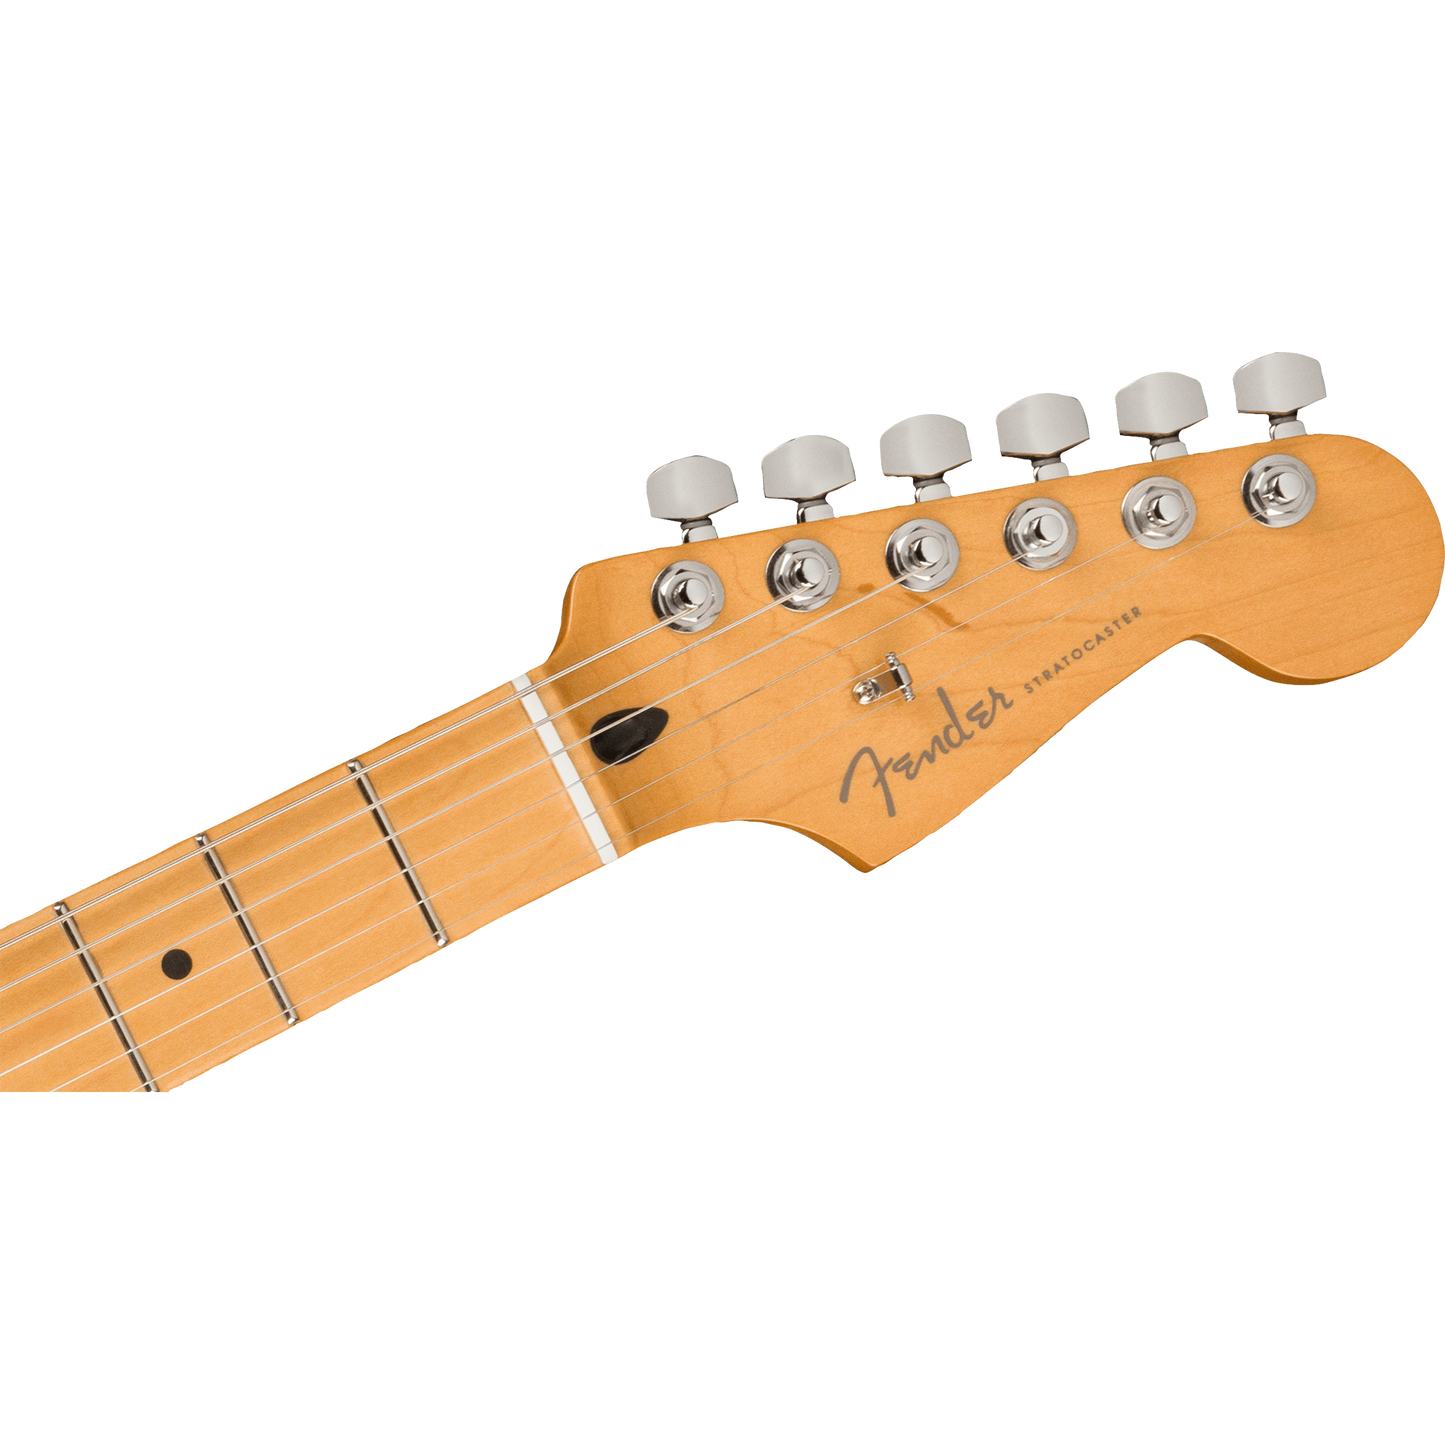 Fender Player Plus Stratocaster® Electric Guitar, Tequila Sunrise